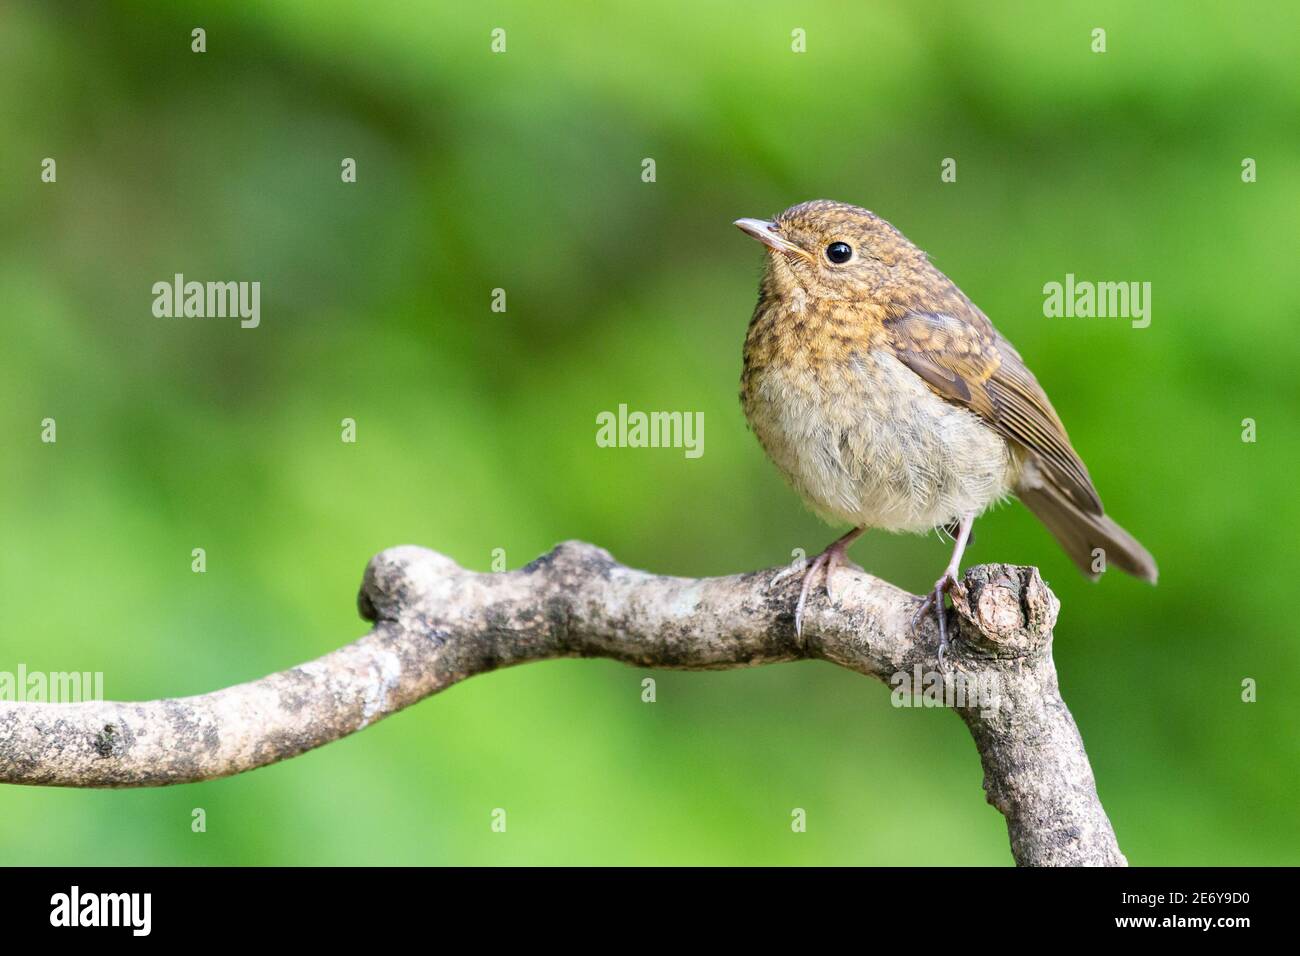 Juvenile Robin [  Erithacus rubecula ] on stick with out of focus green background Stock Photo